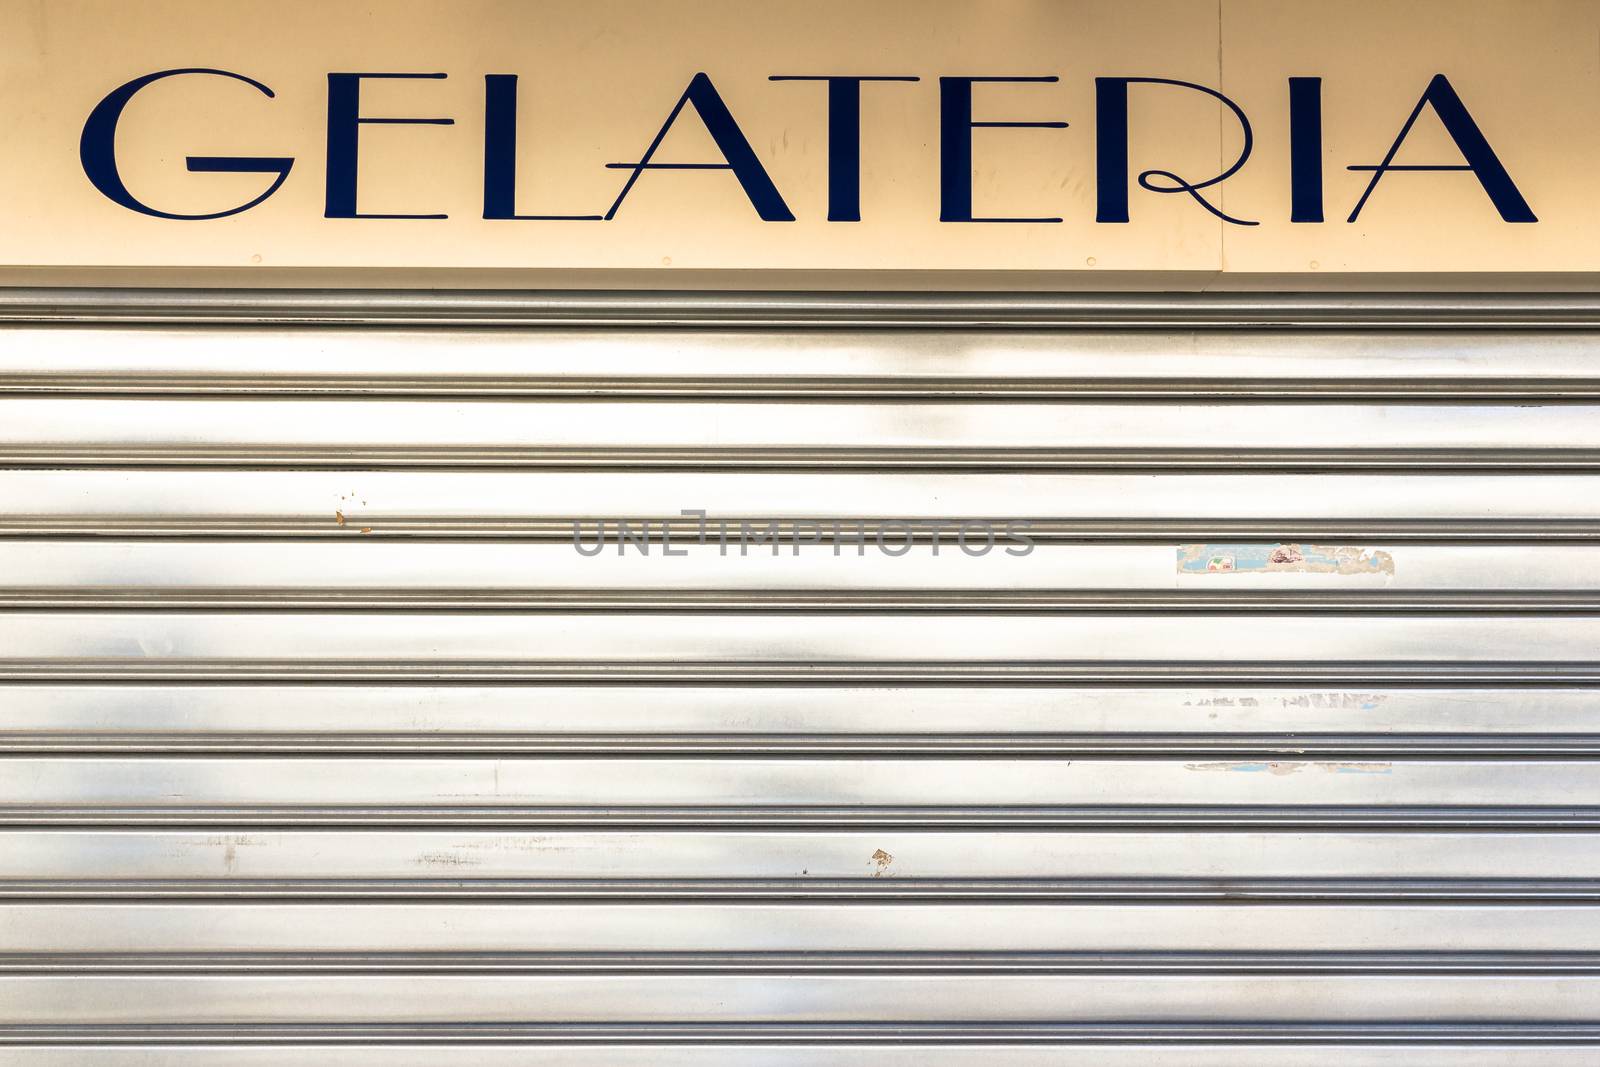 An old Italian ice cream shop with the lowered shutter.